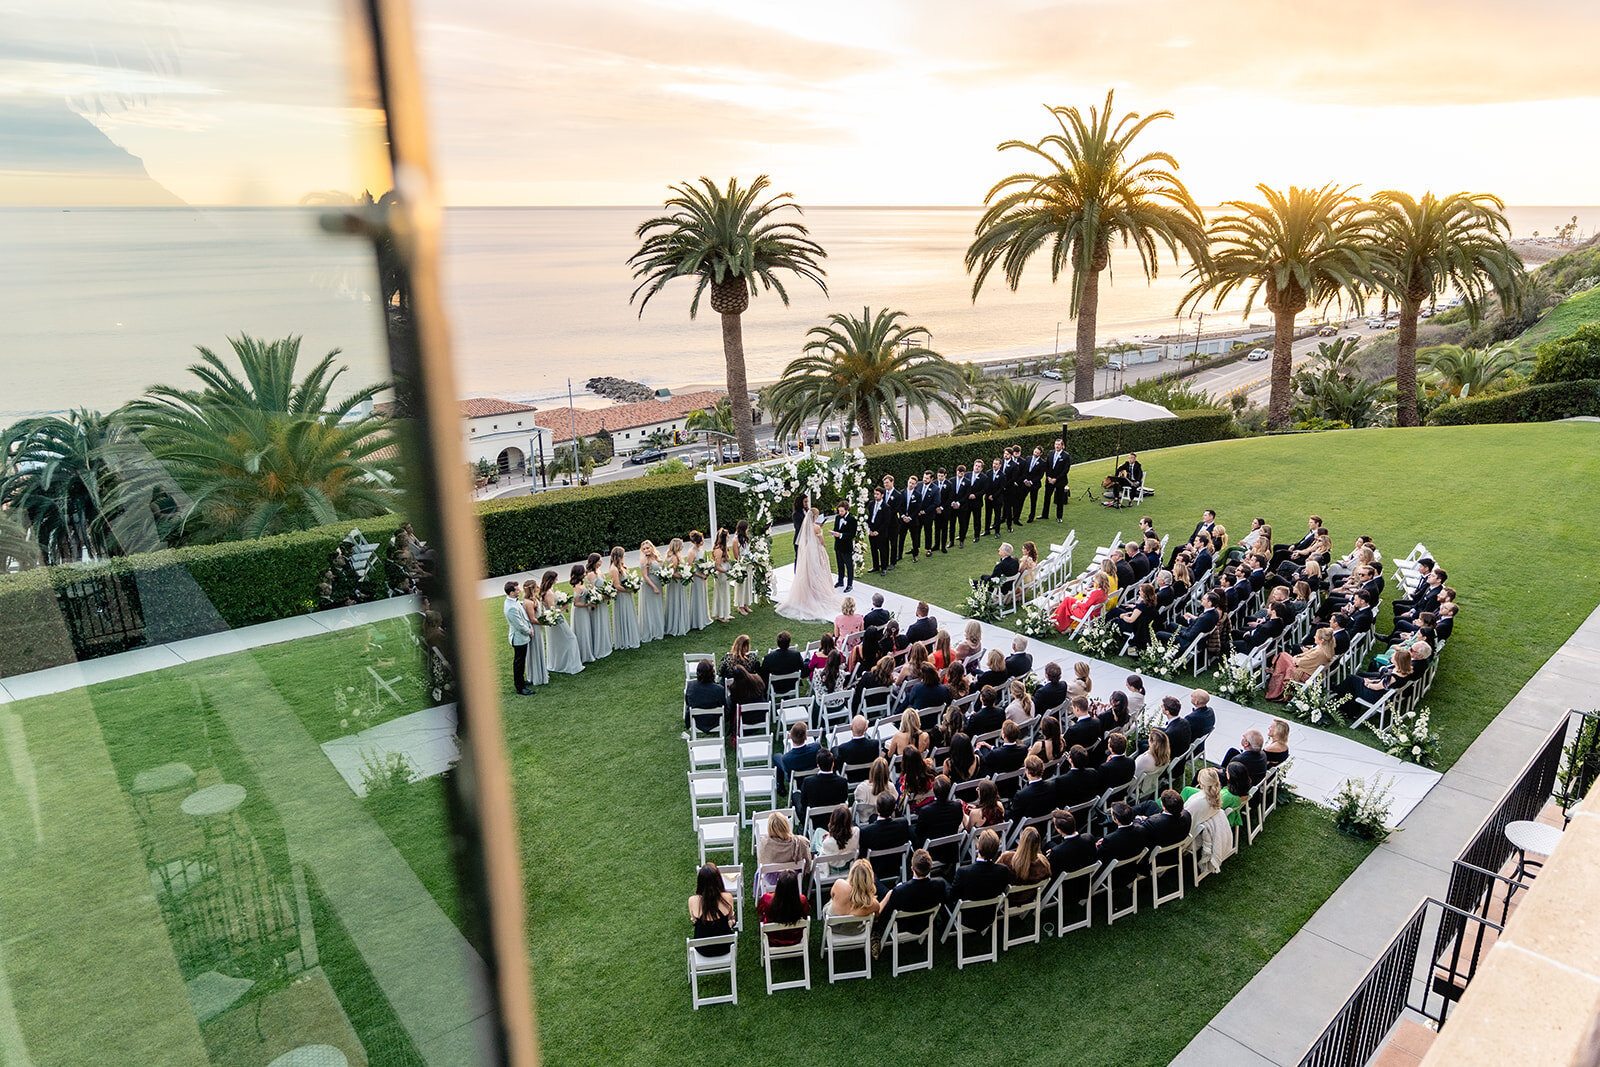 Wide angle view of a wedding ceremony with ocean views at The Bel Air Bay Club.